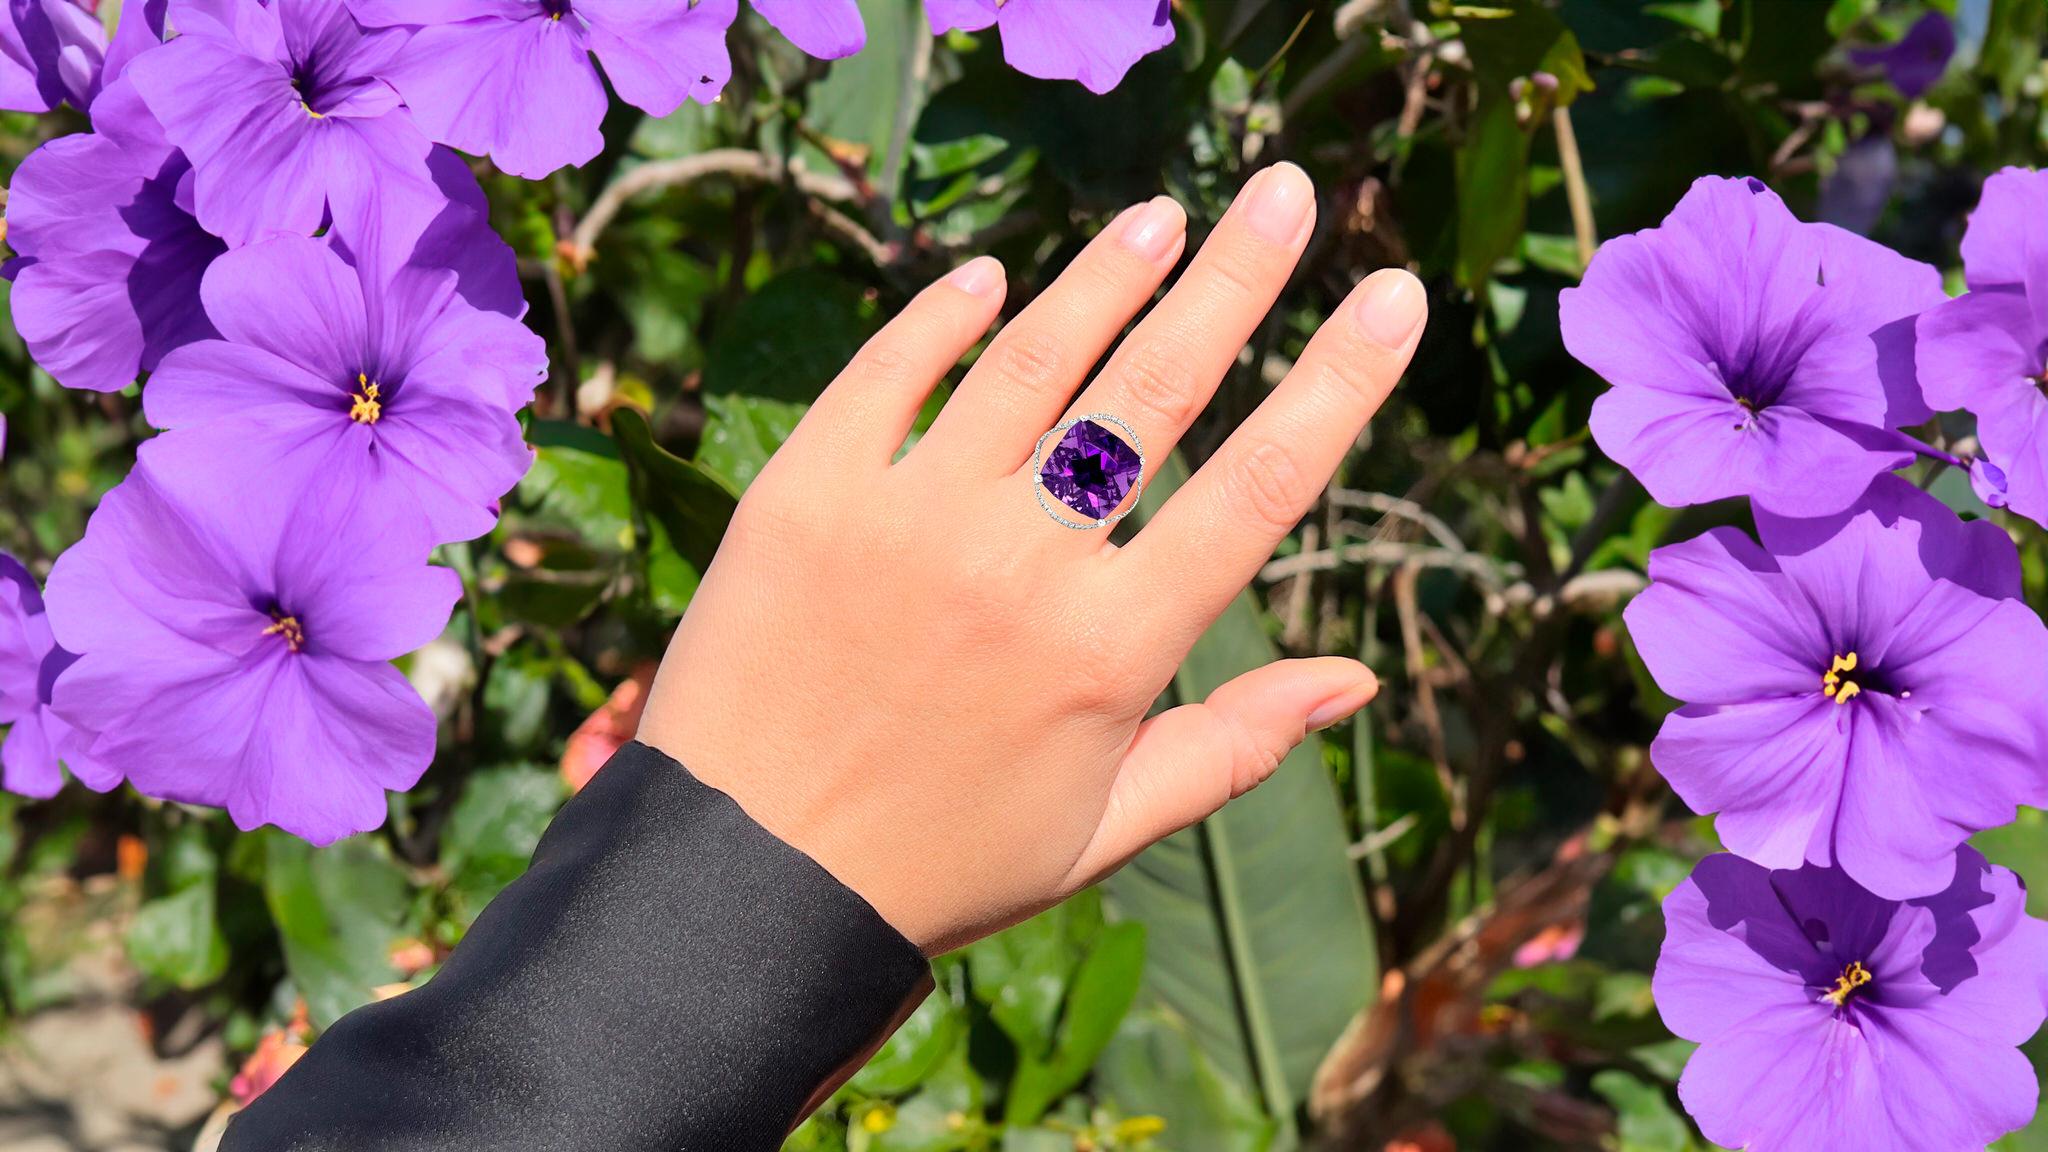 It comes with the Gemological Appraisal by GIA GG/AJP
All Gemstones are Natural
Amethyst = 14.41 Carat
108 Diamonds = 0.48 Carats
Metal: 14K White Gold
Ring Size: 6.5* US
*It can be resized complimentary